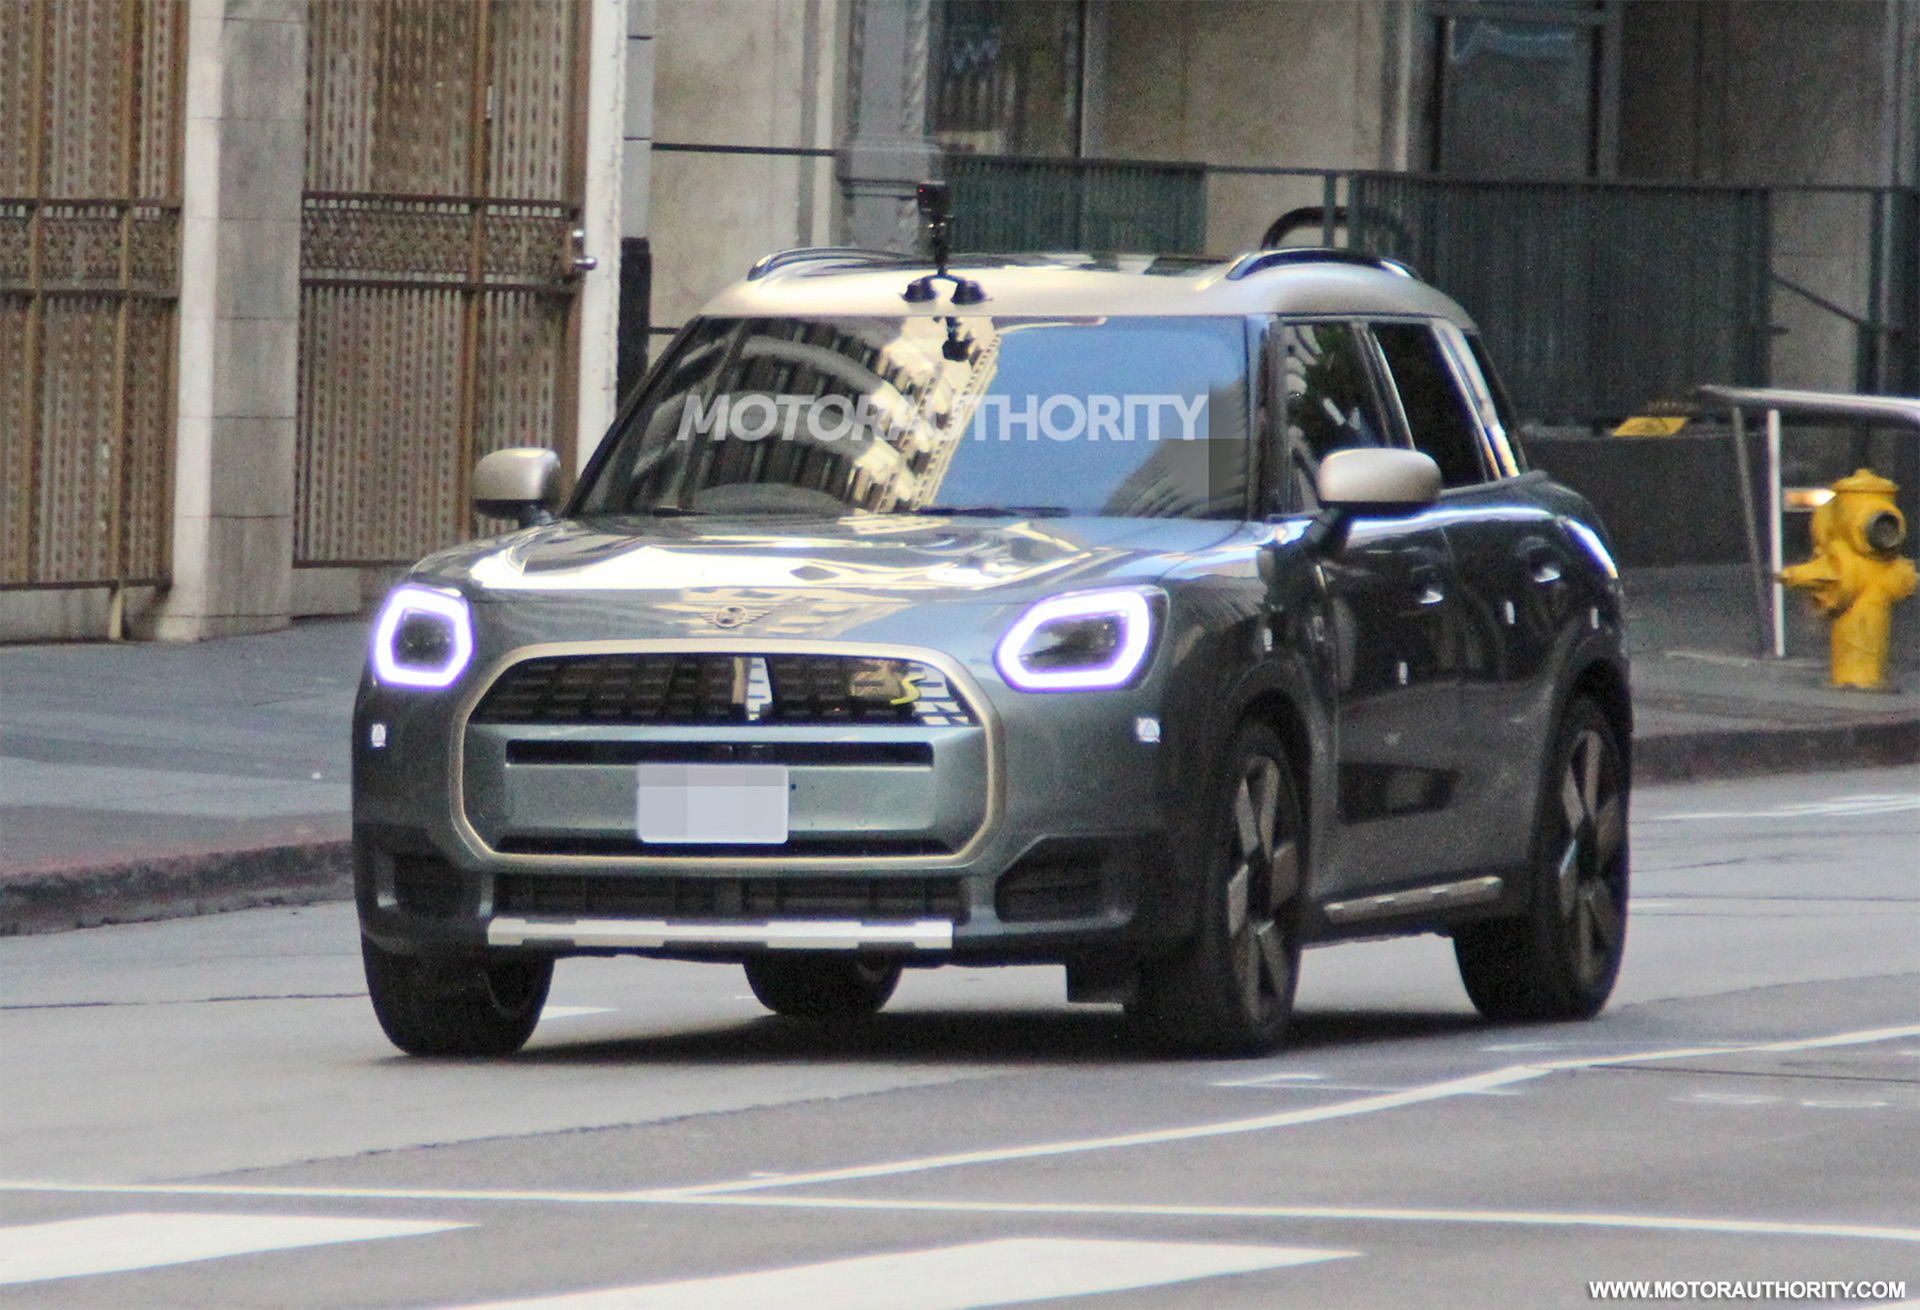 2025 Mini Countryman spy pictures and video - offroadingblog.com